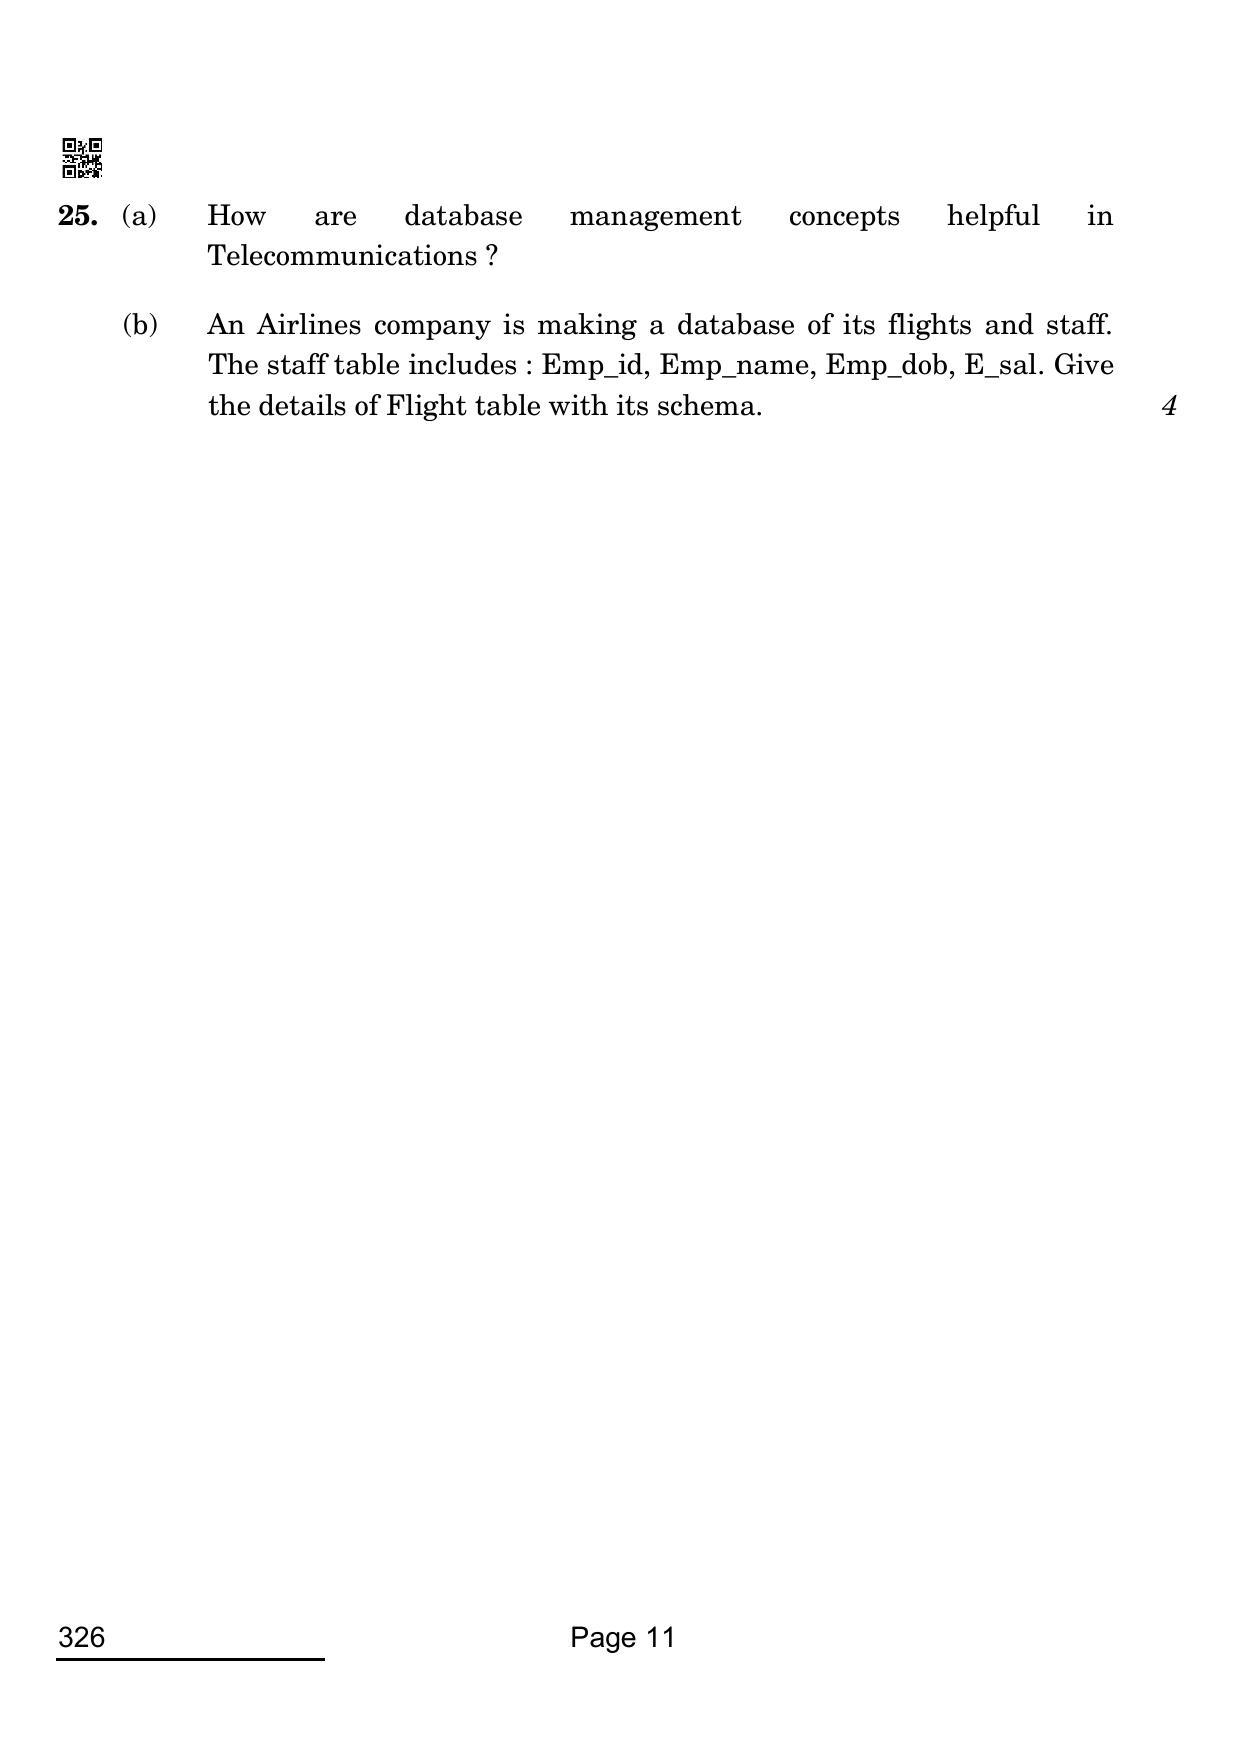 CBSE Class 12 326_Information Technology 2022 Question Paper - Page 11